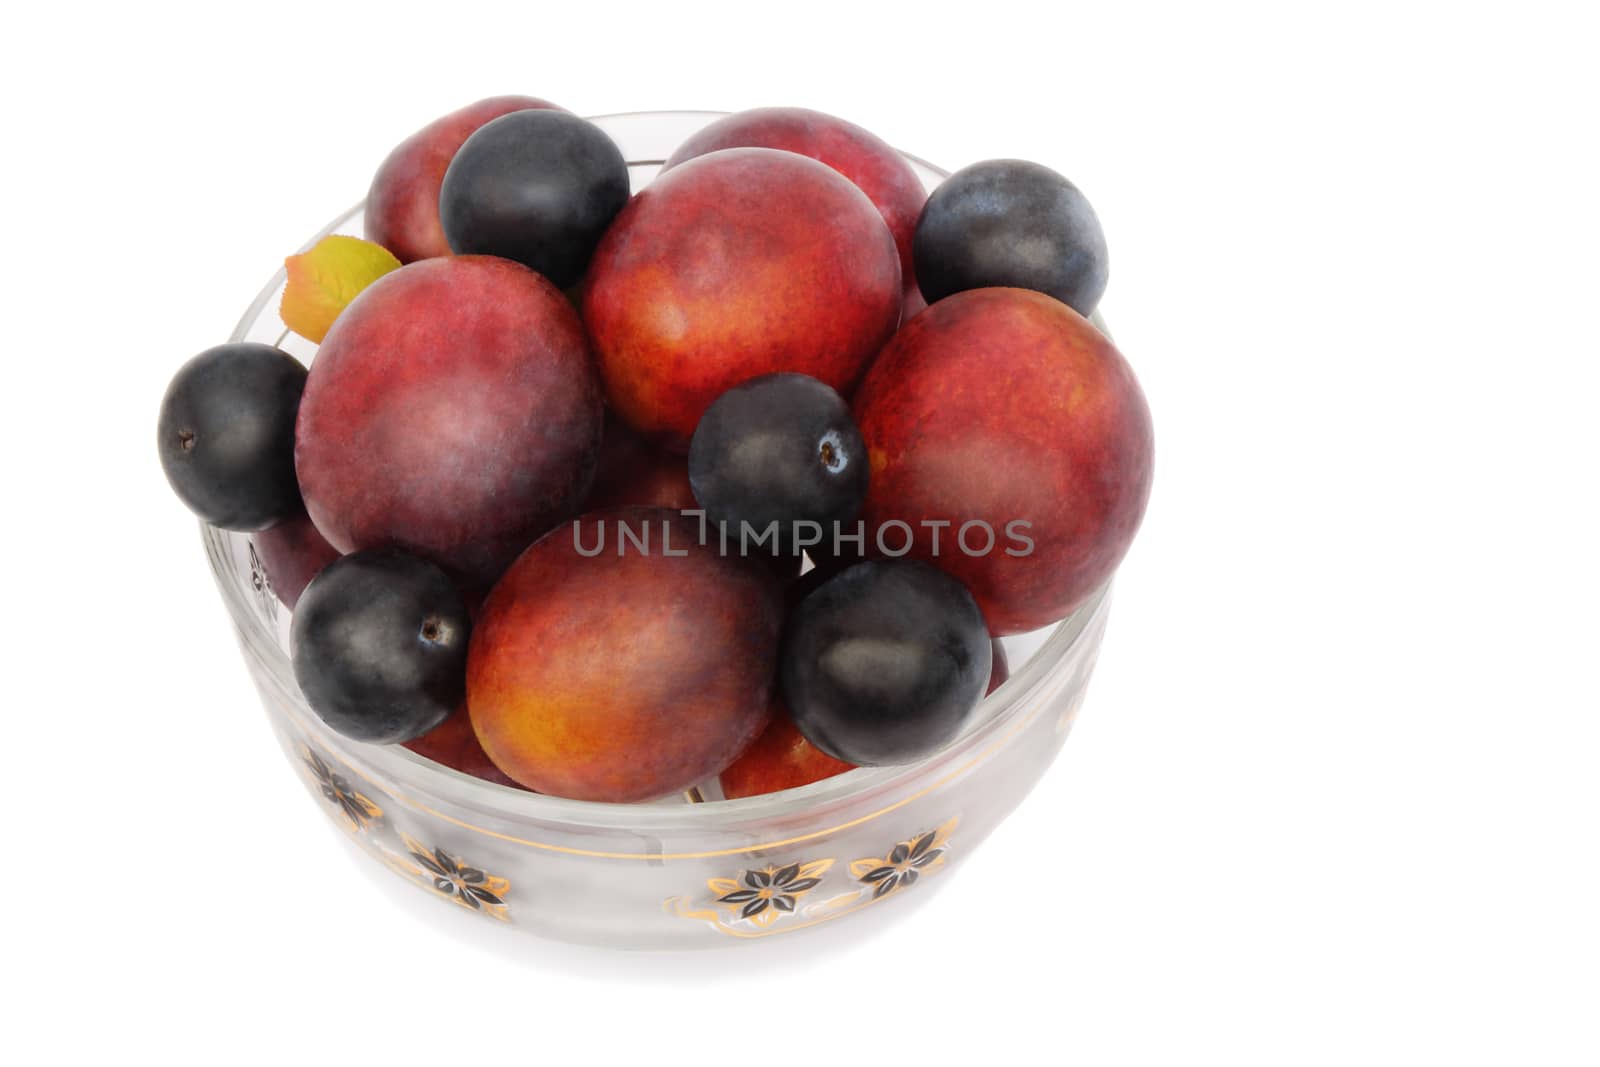 Large ripe plums and prunes in a vase for fruit. Presented on a white background.